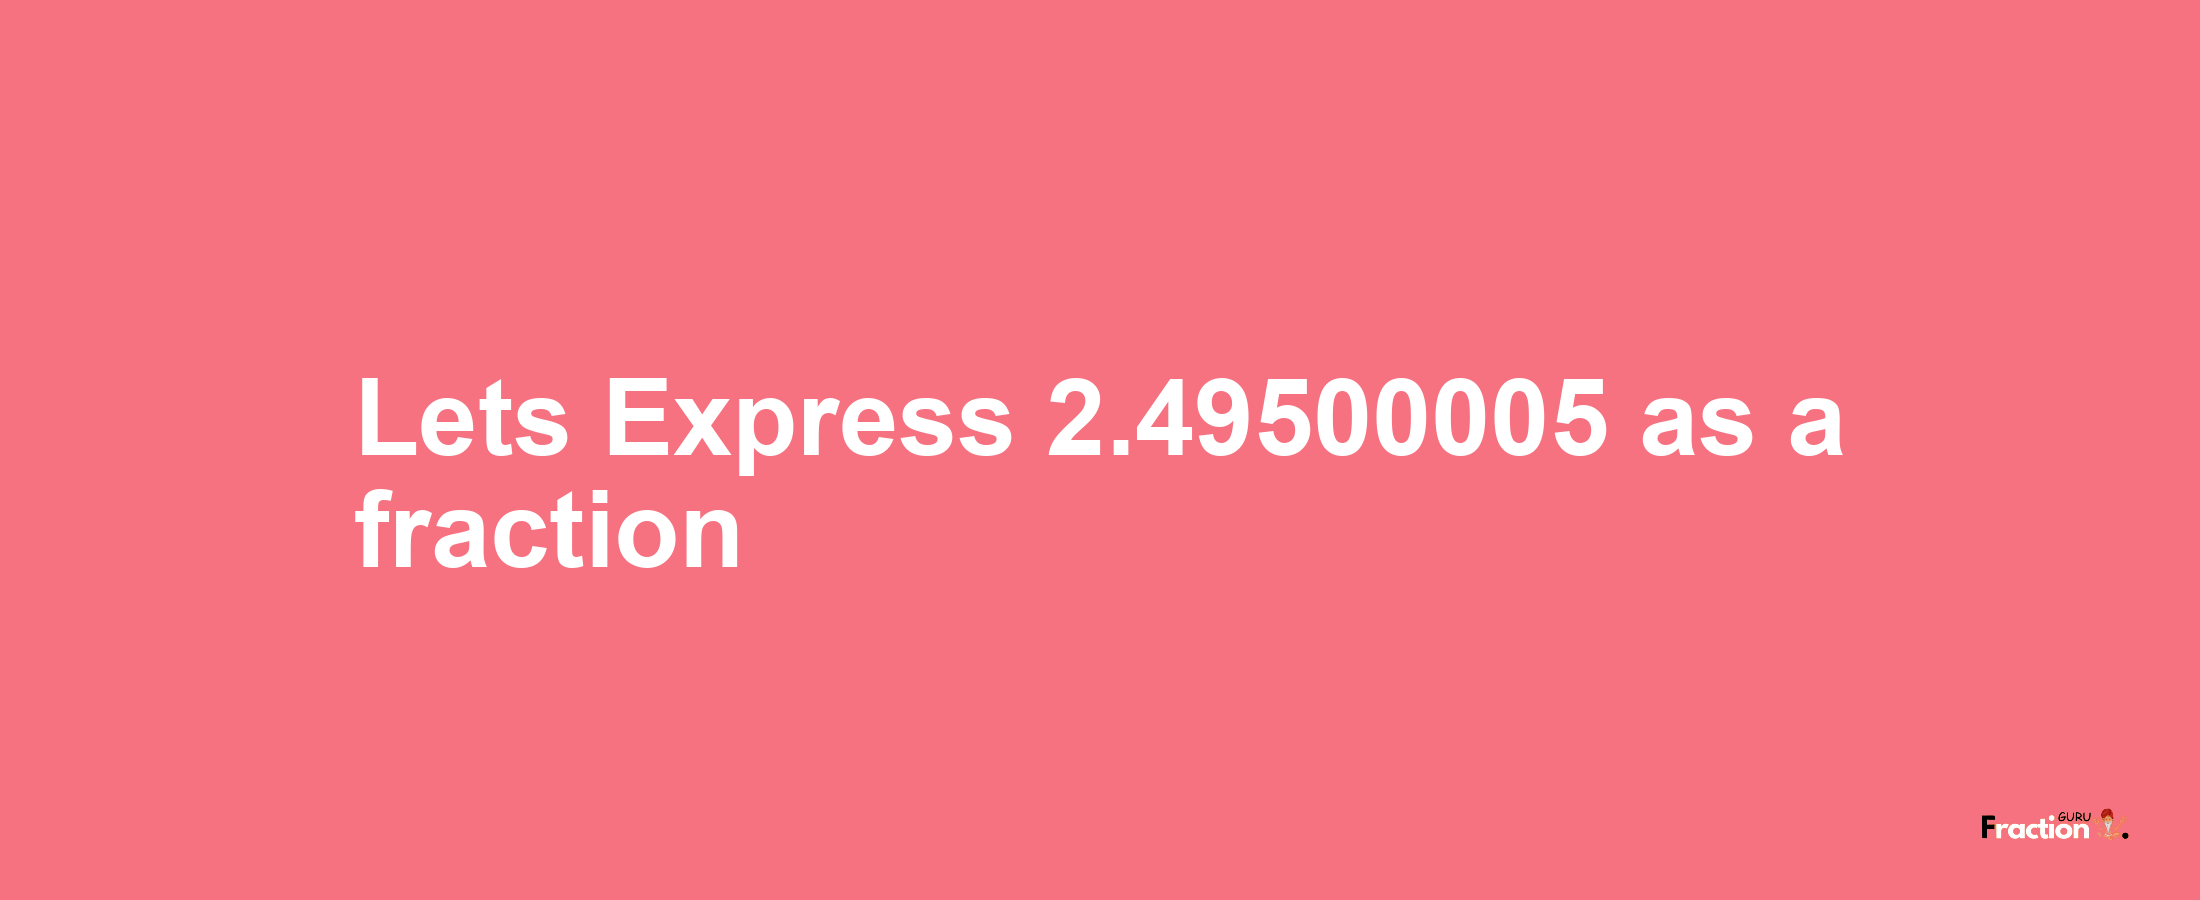 Lets Express 2.49500005 as afraction